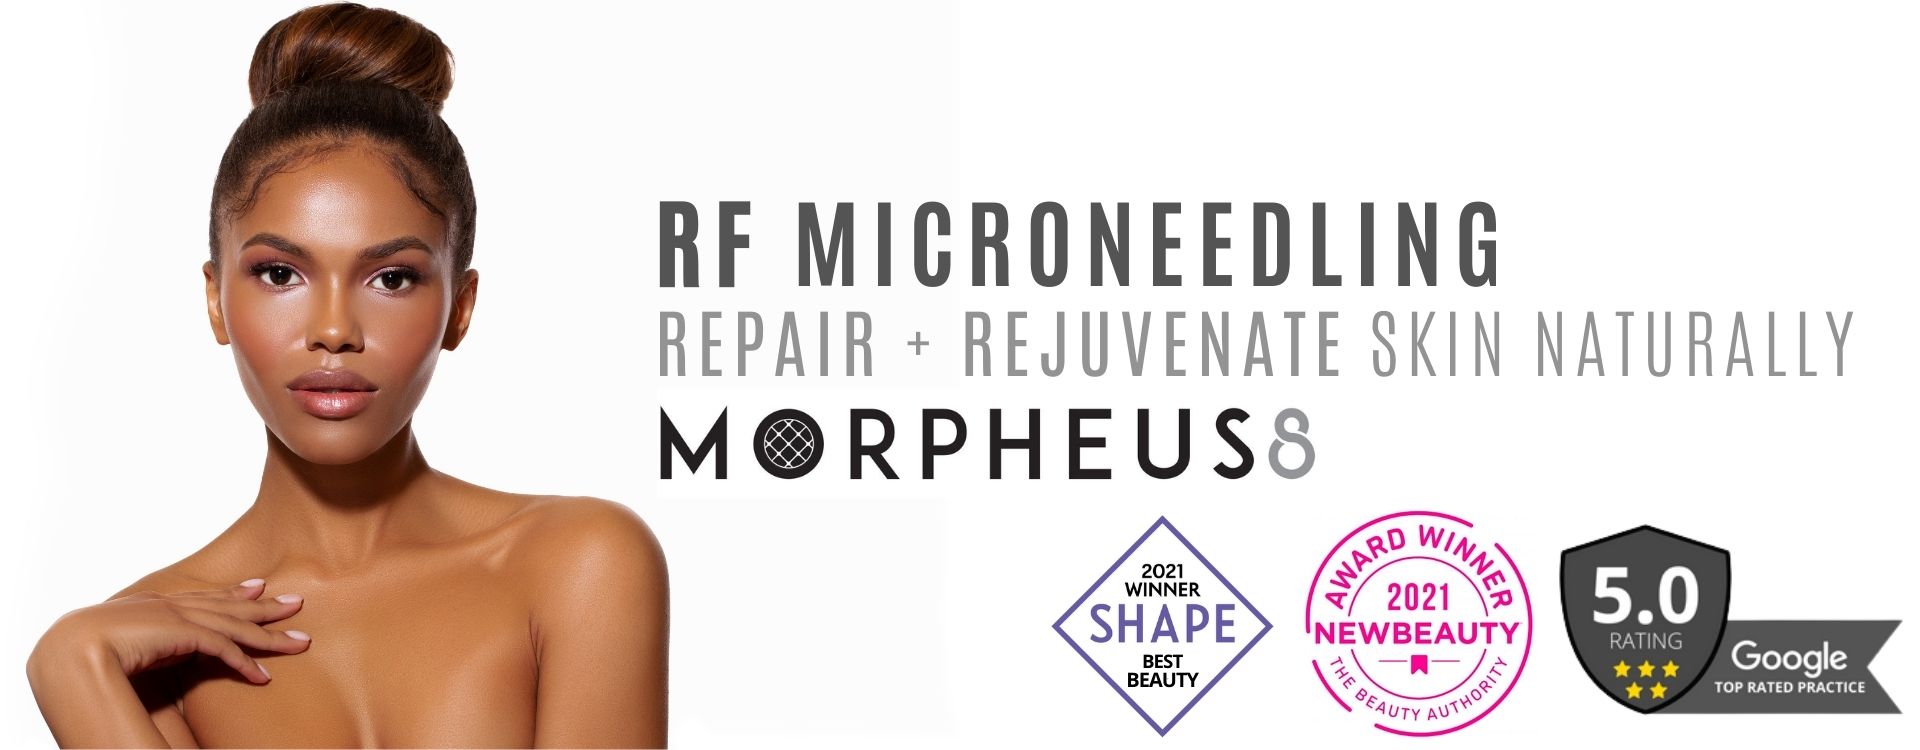 Beautiful woman with radiant skin modeling for RF Microneedling, Morpheus8 at Viva Atlanta Wellness in Kennesaw, GA. Top rated medical spa.